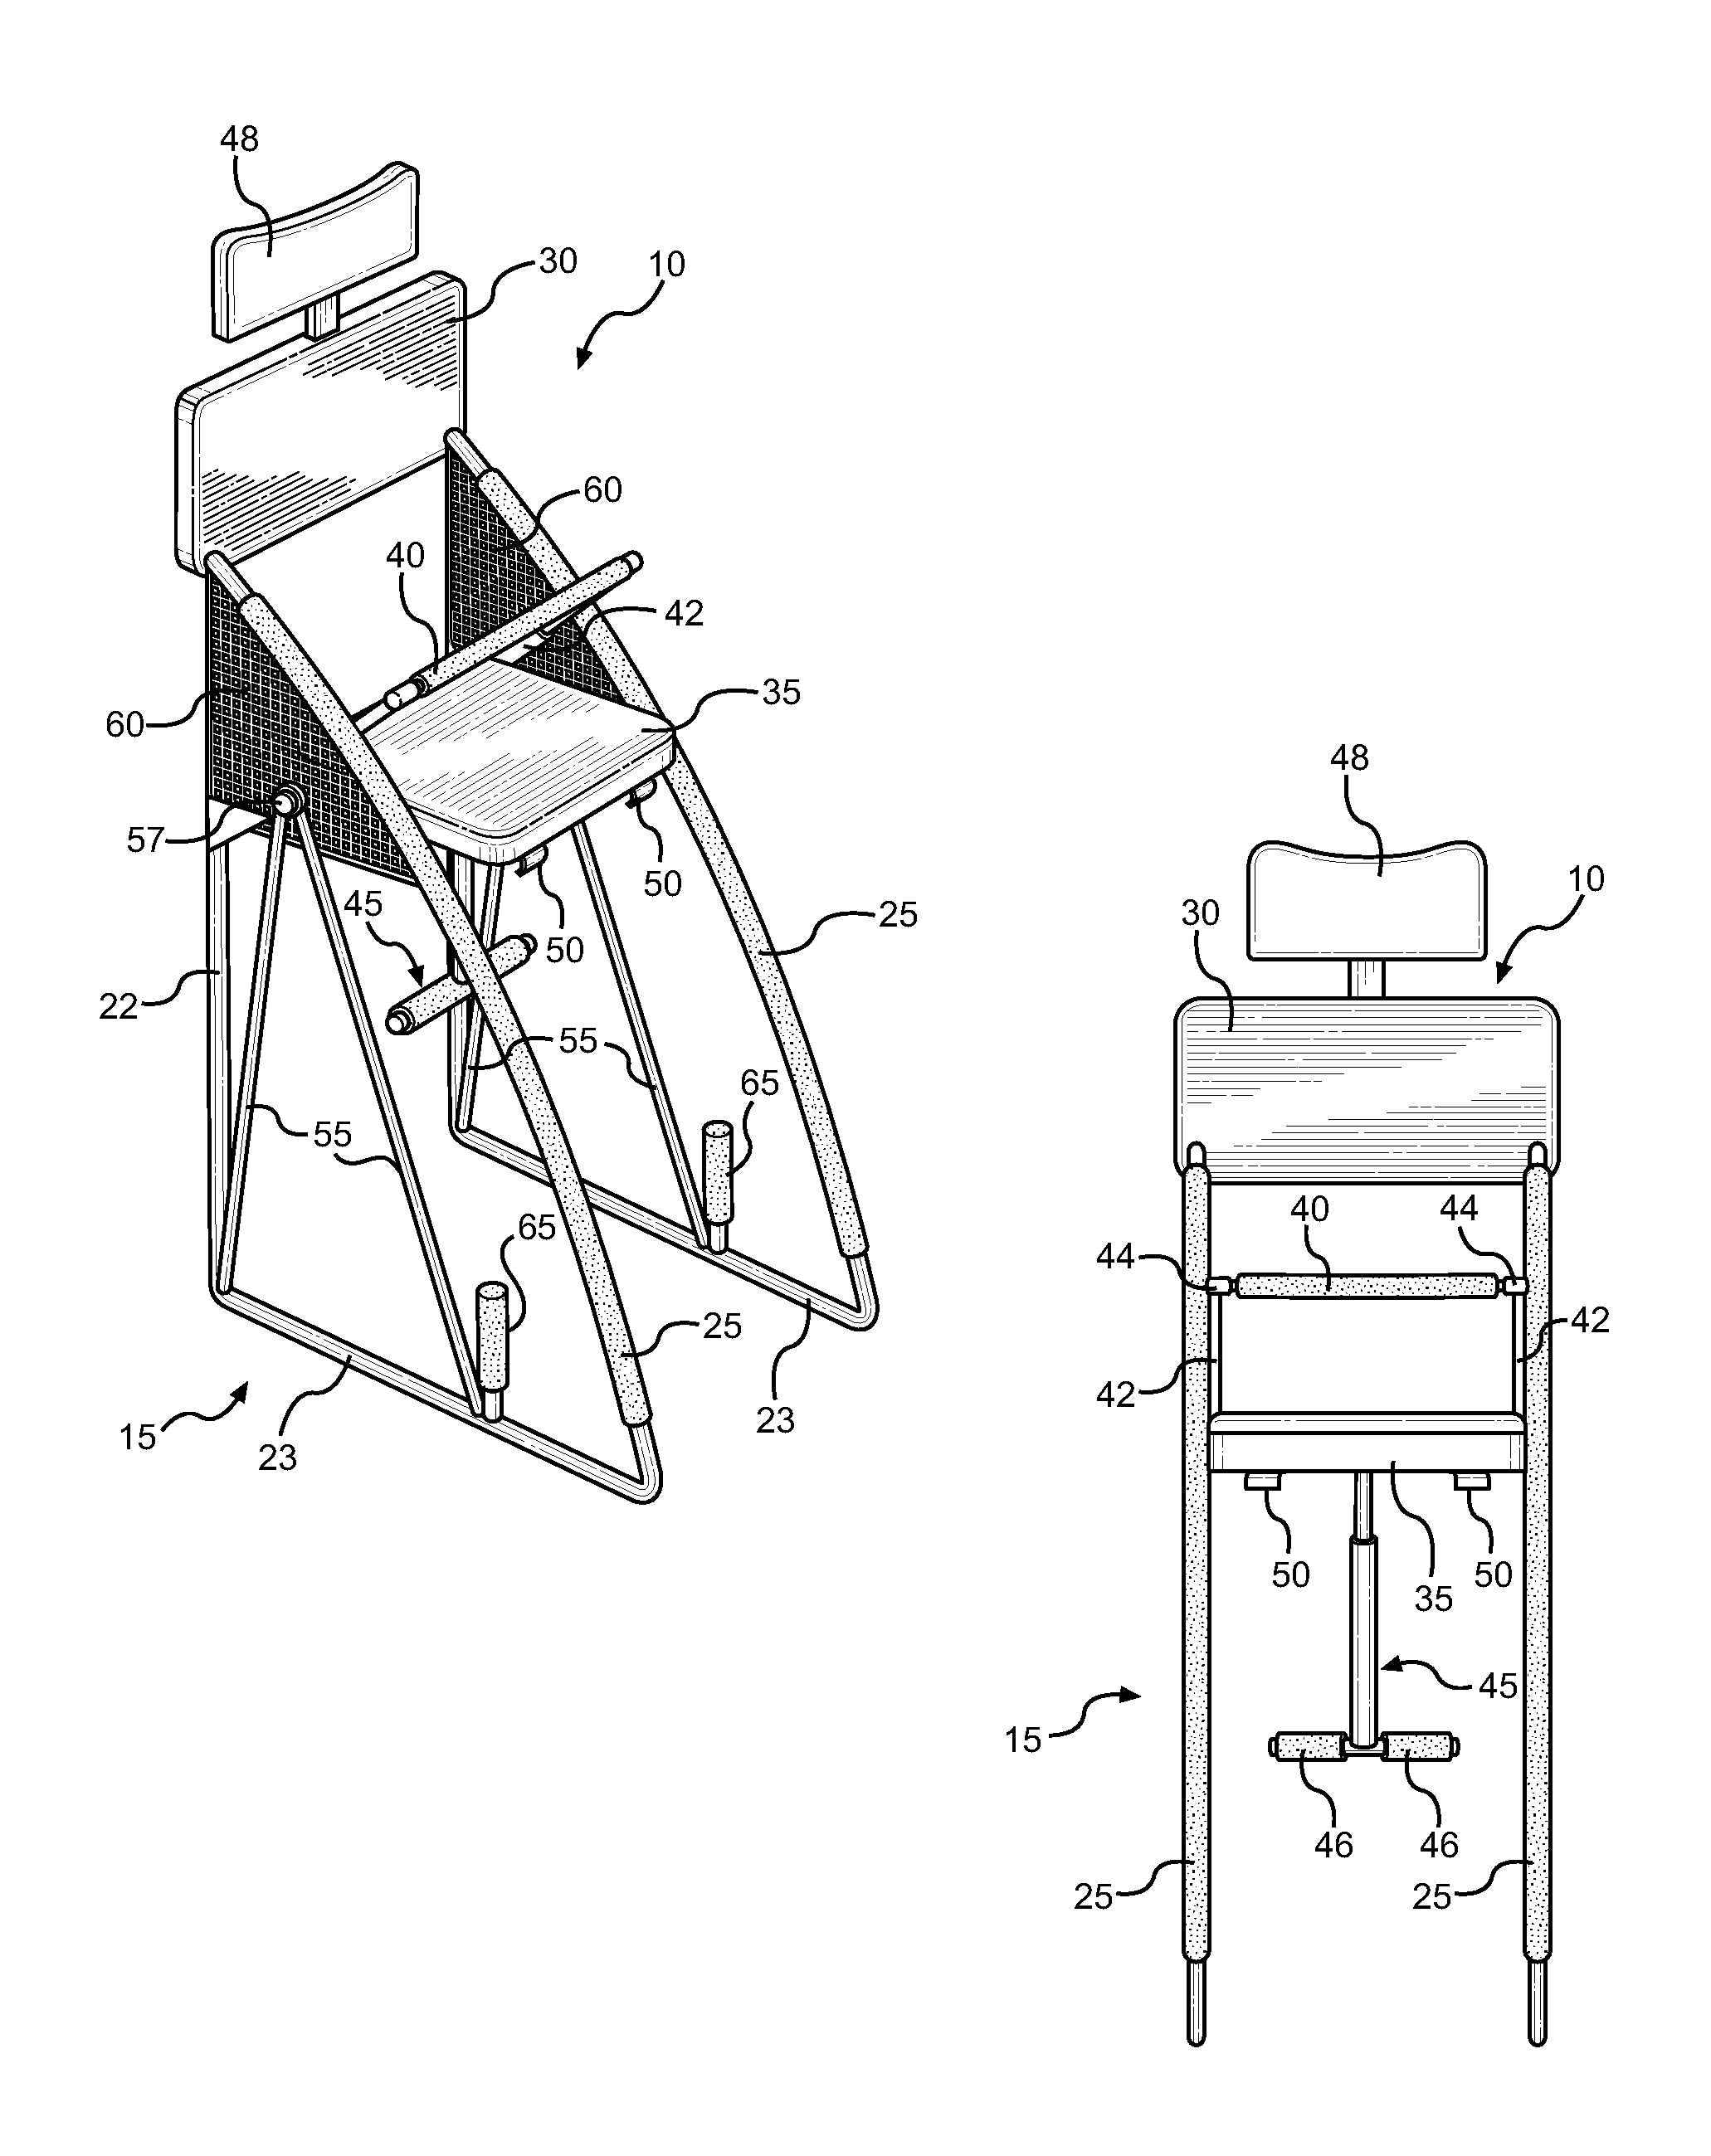 Seated Inversion Chair and Method of Treating Migraine Headaches